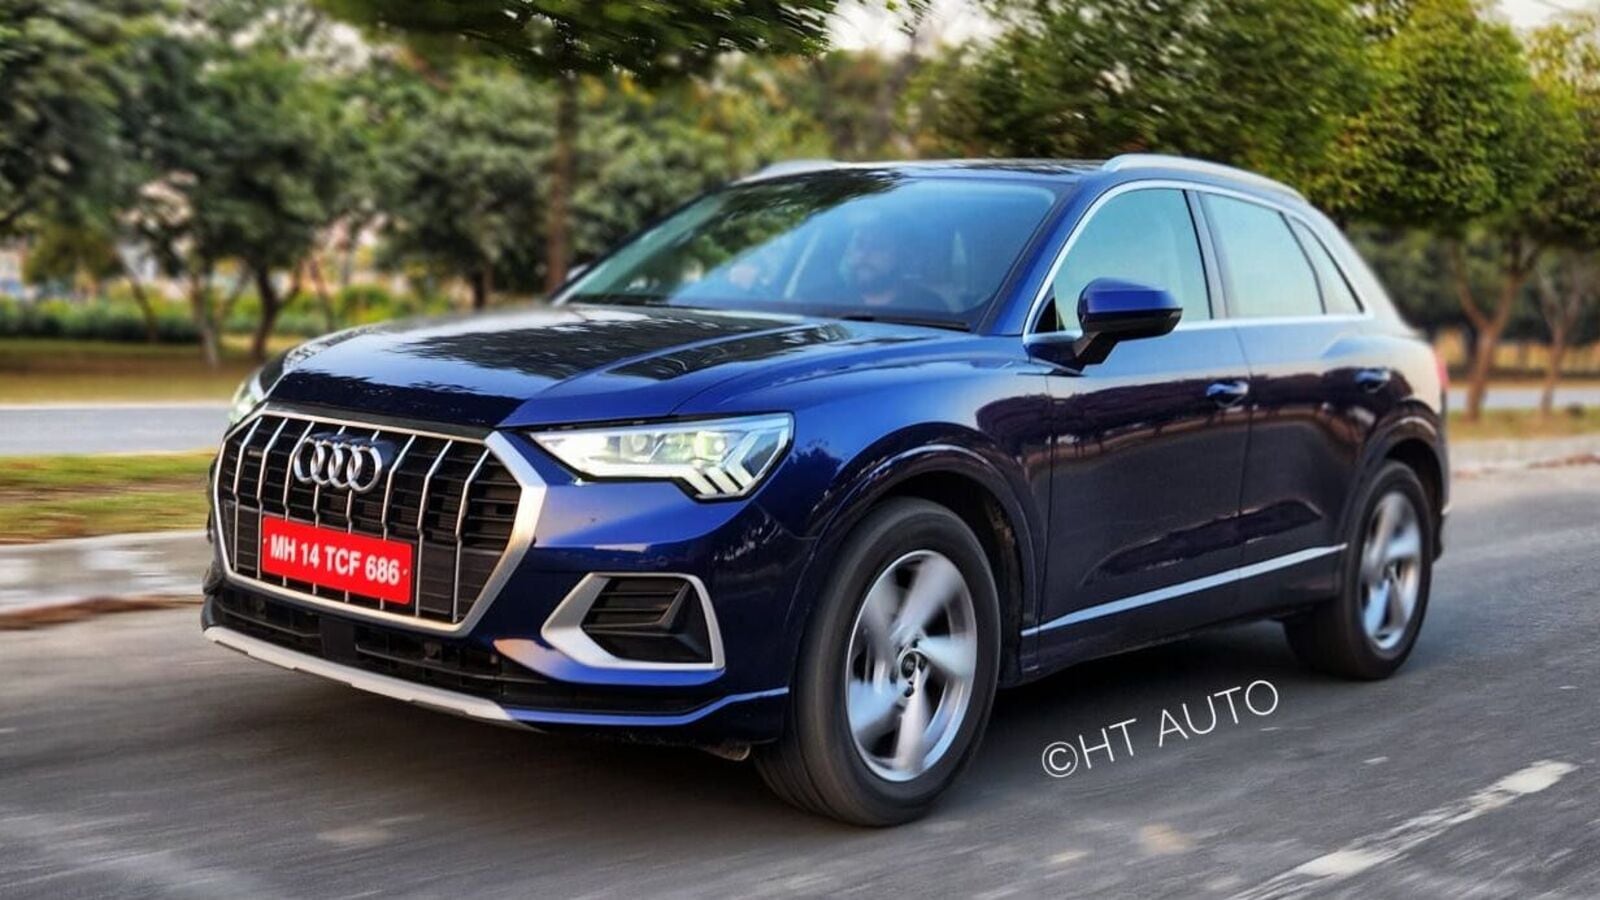 New Audi Q3 2022: Our observations after a day of driving